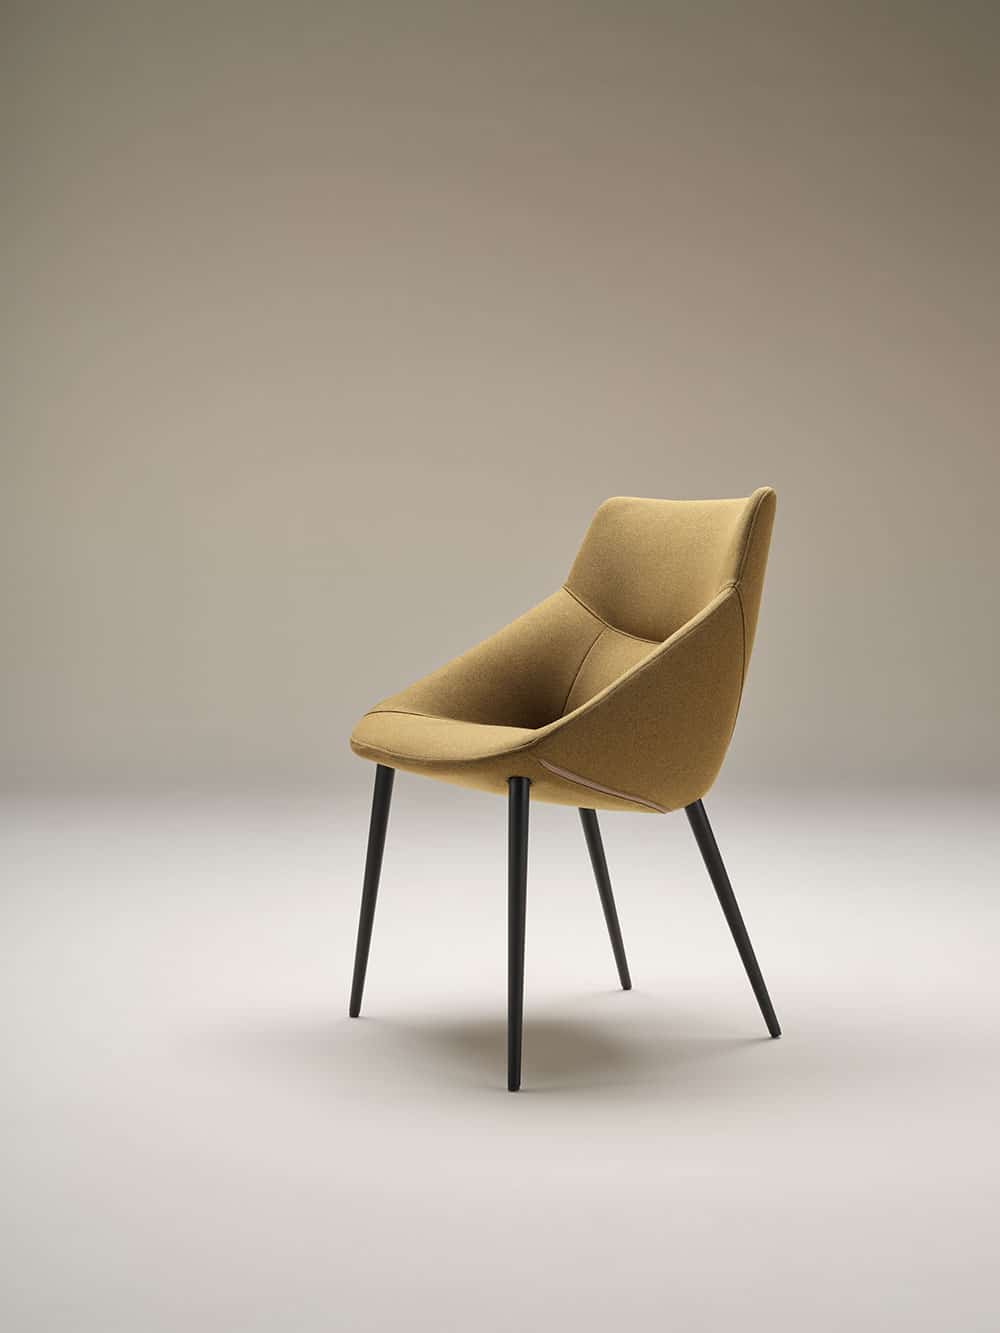 Graceful Seating: The Elegant Bow Chair for Modern Interiors插图3